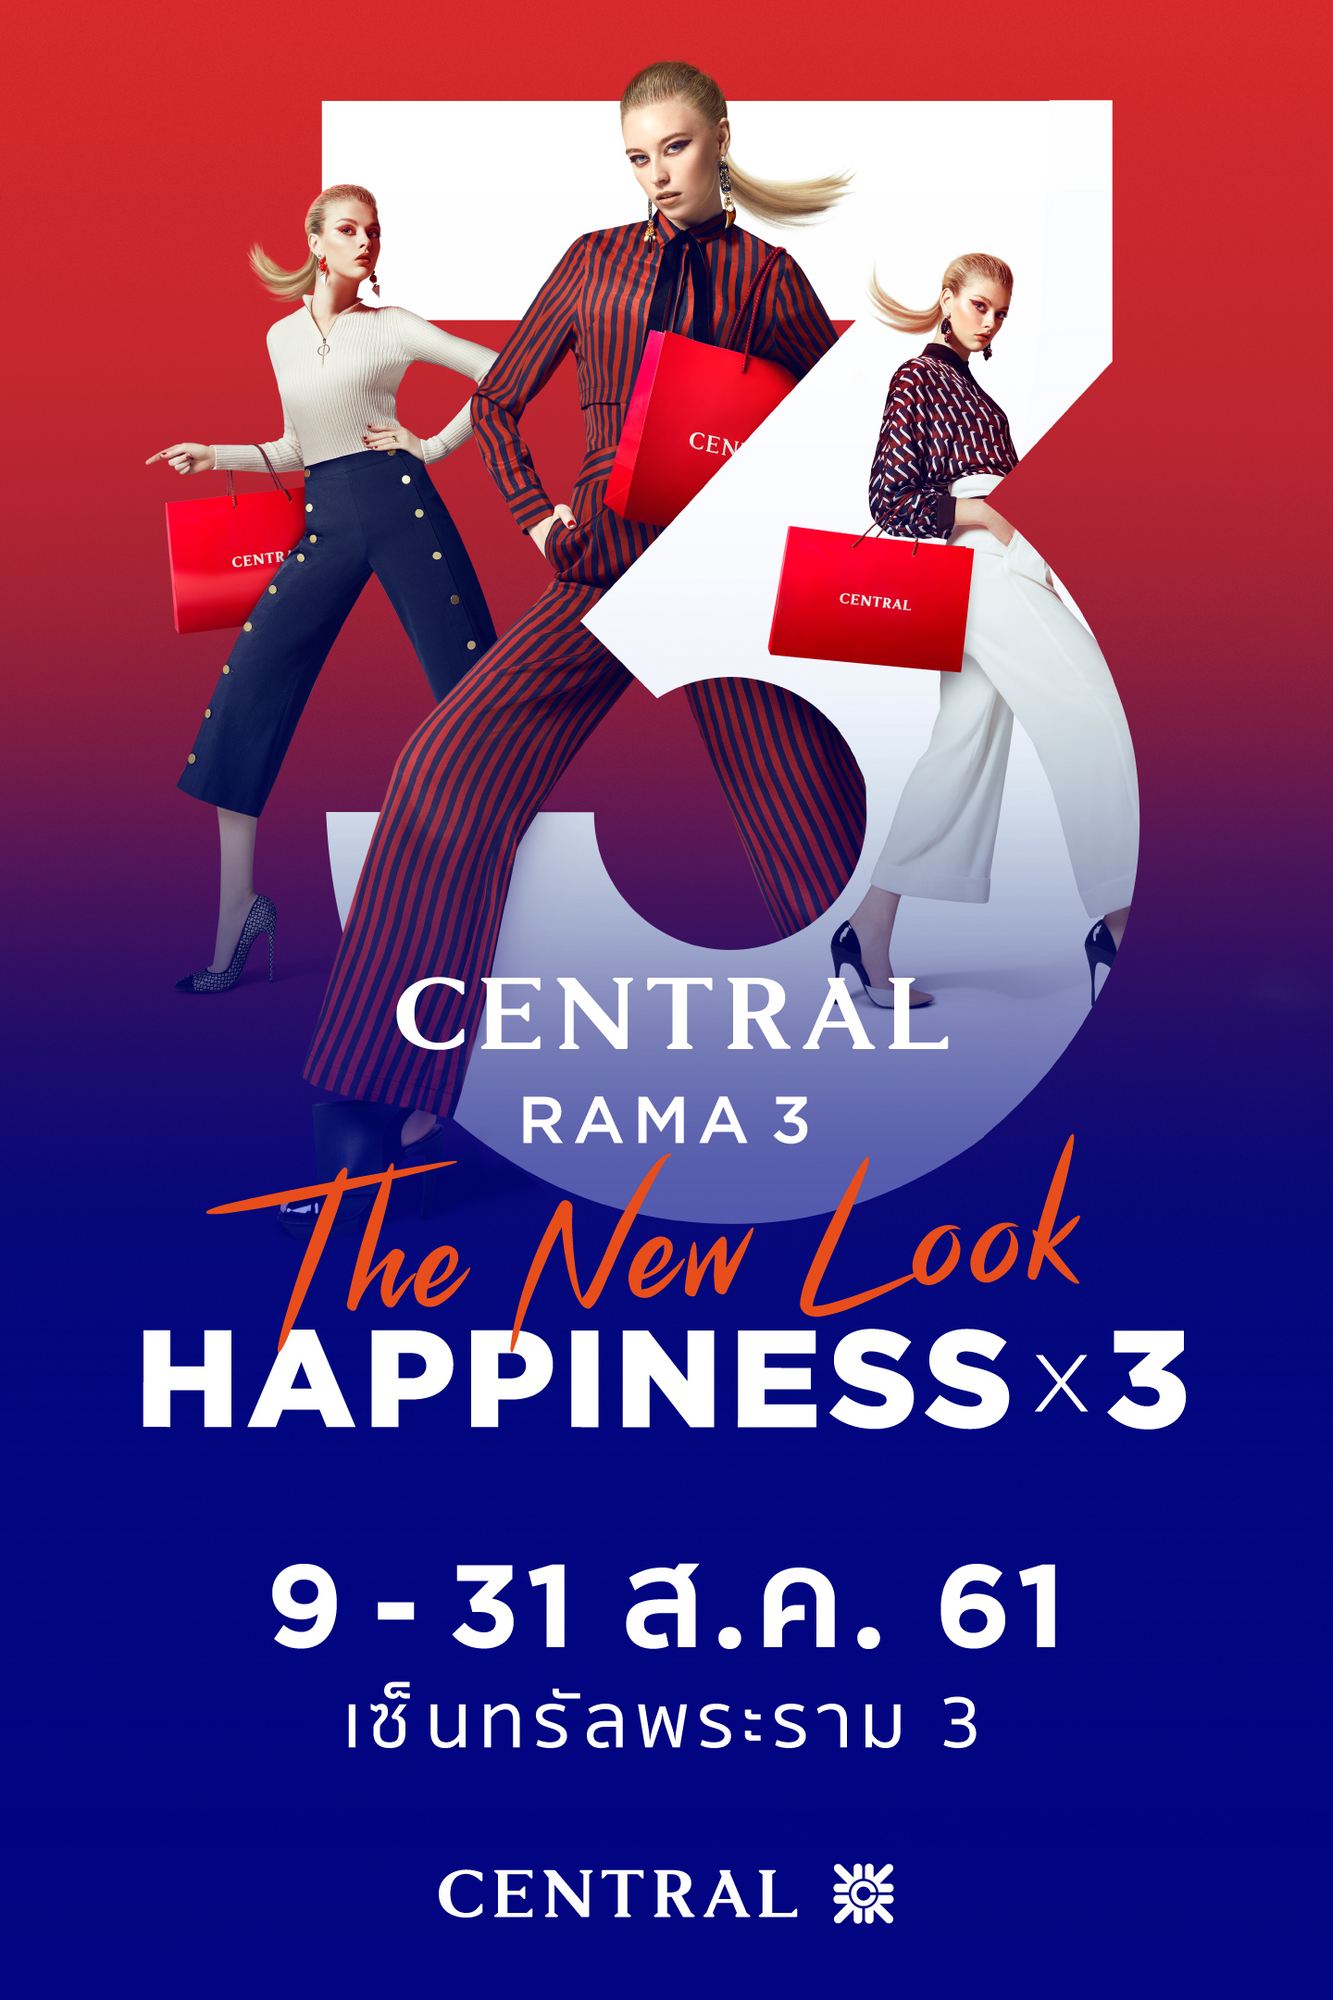 Central Rama 3 The New Look Happiness X3